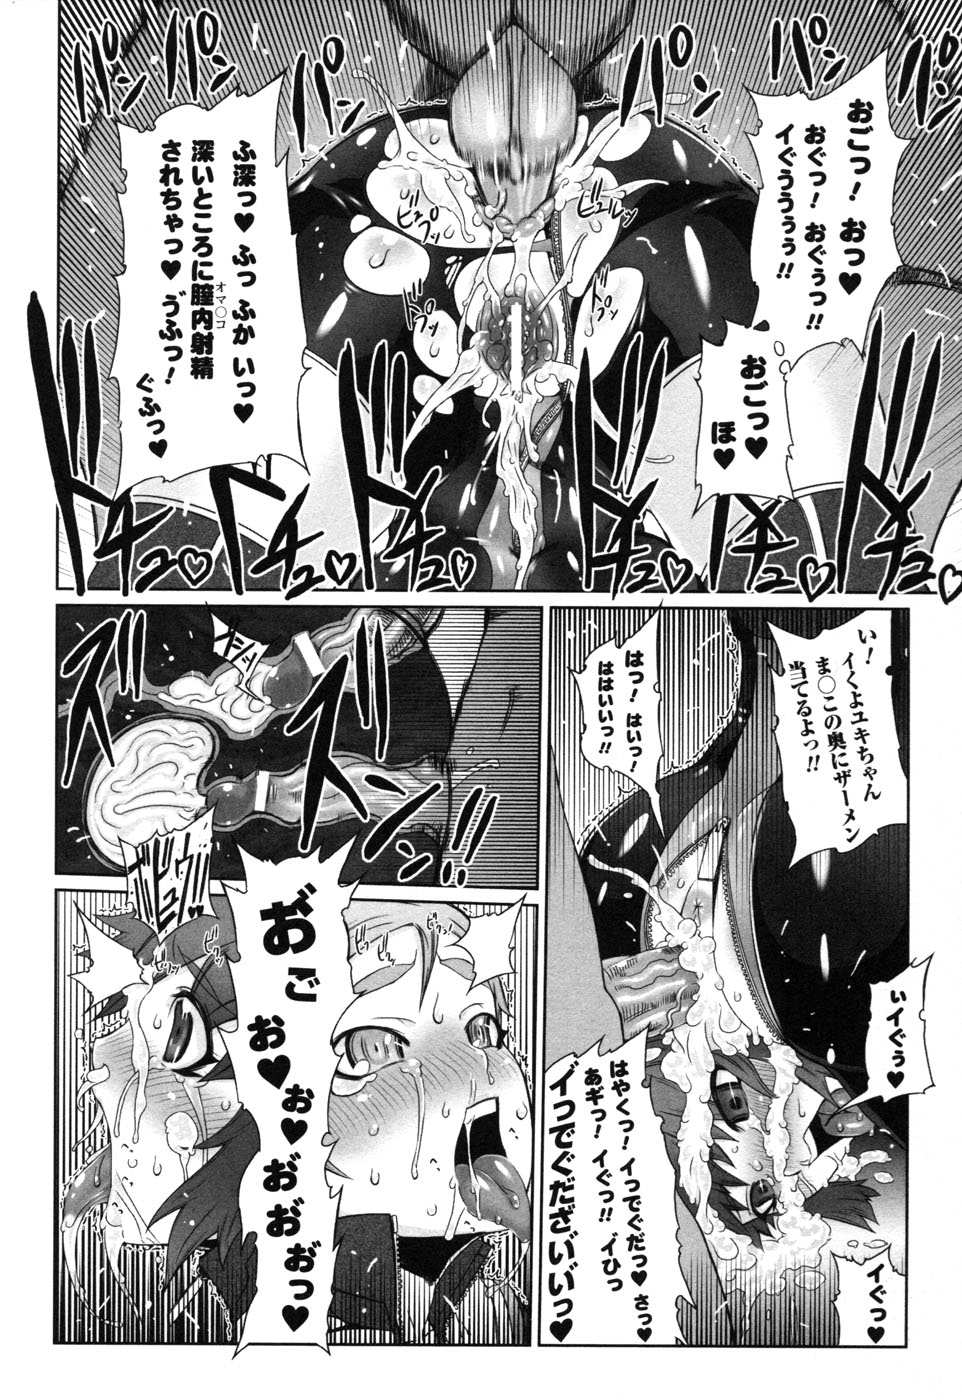 Rider Suit Heroine Anthology Comics 2 page 44 full